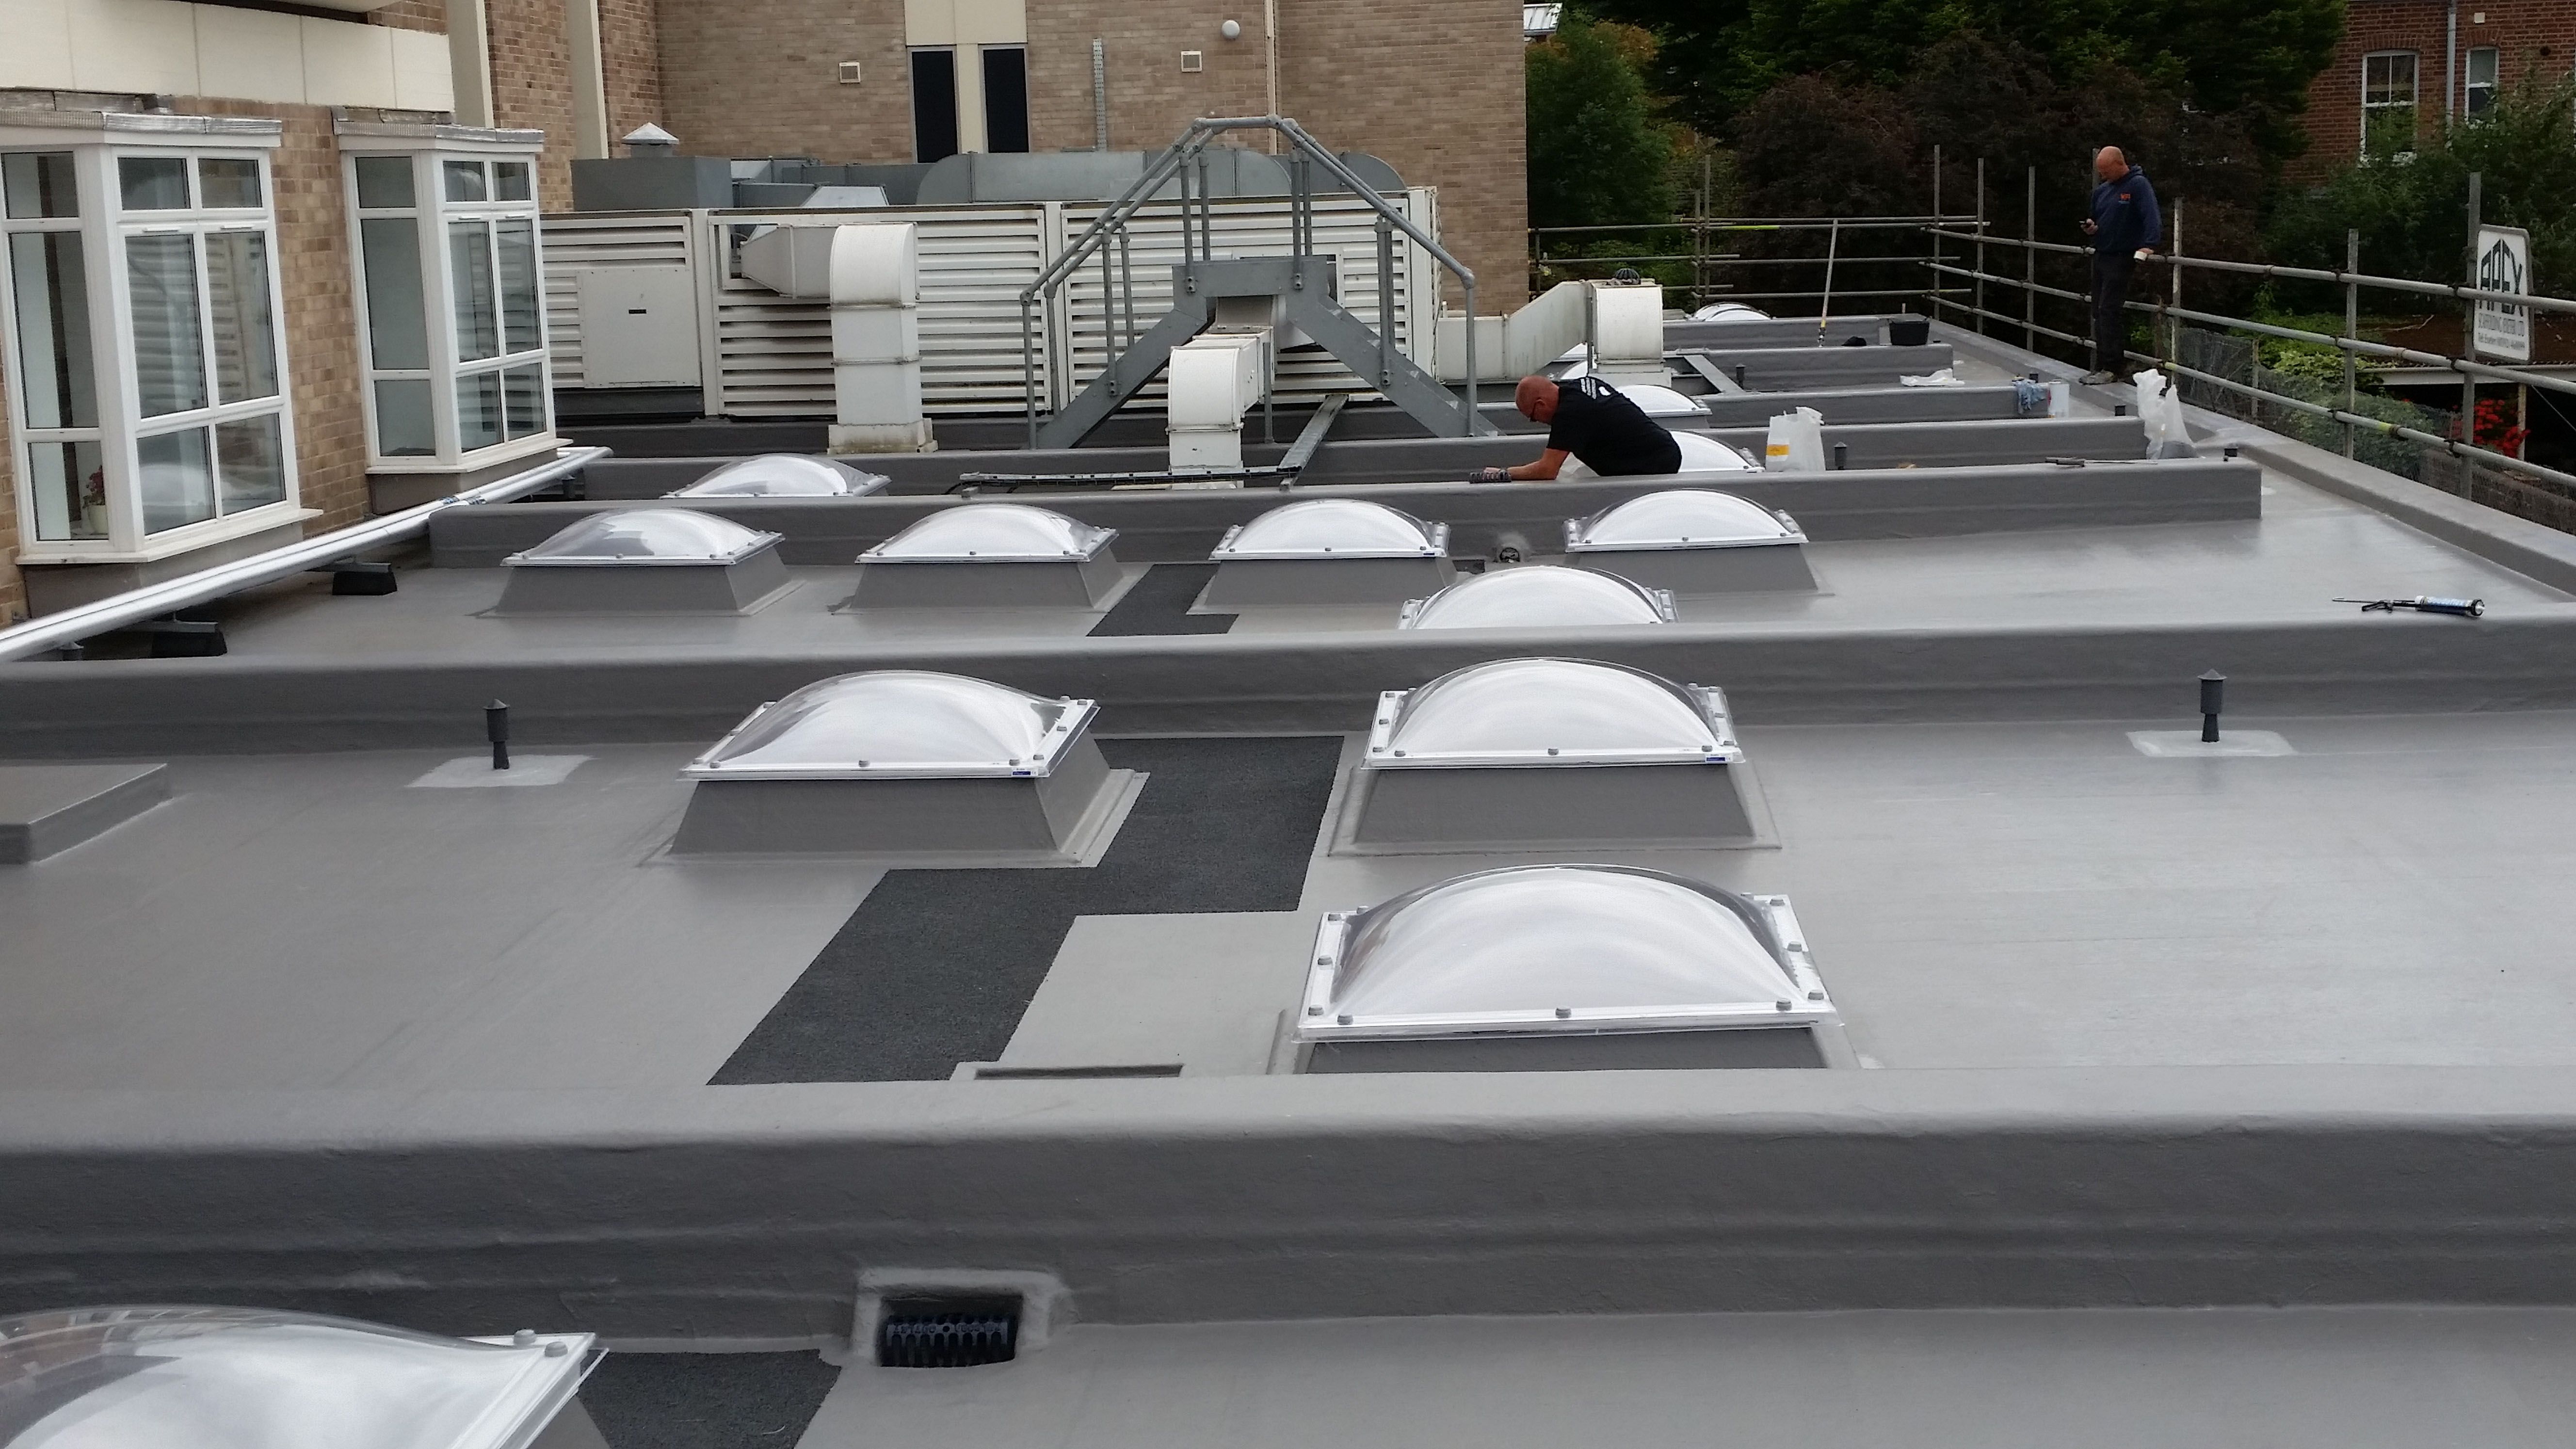 Liquid Roofing and Waterproofing – Centaur Technologies (with Western Flat Roofing Company), South Cloisters Kitchen Roof, Exeter University